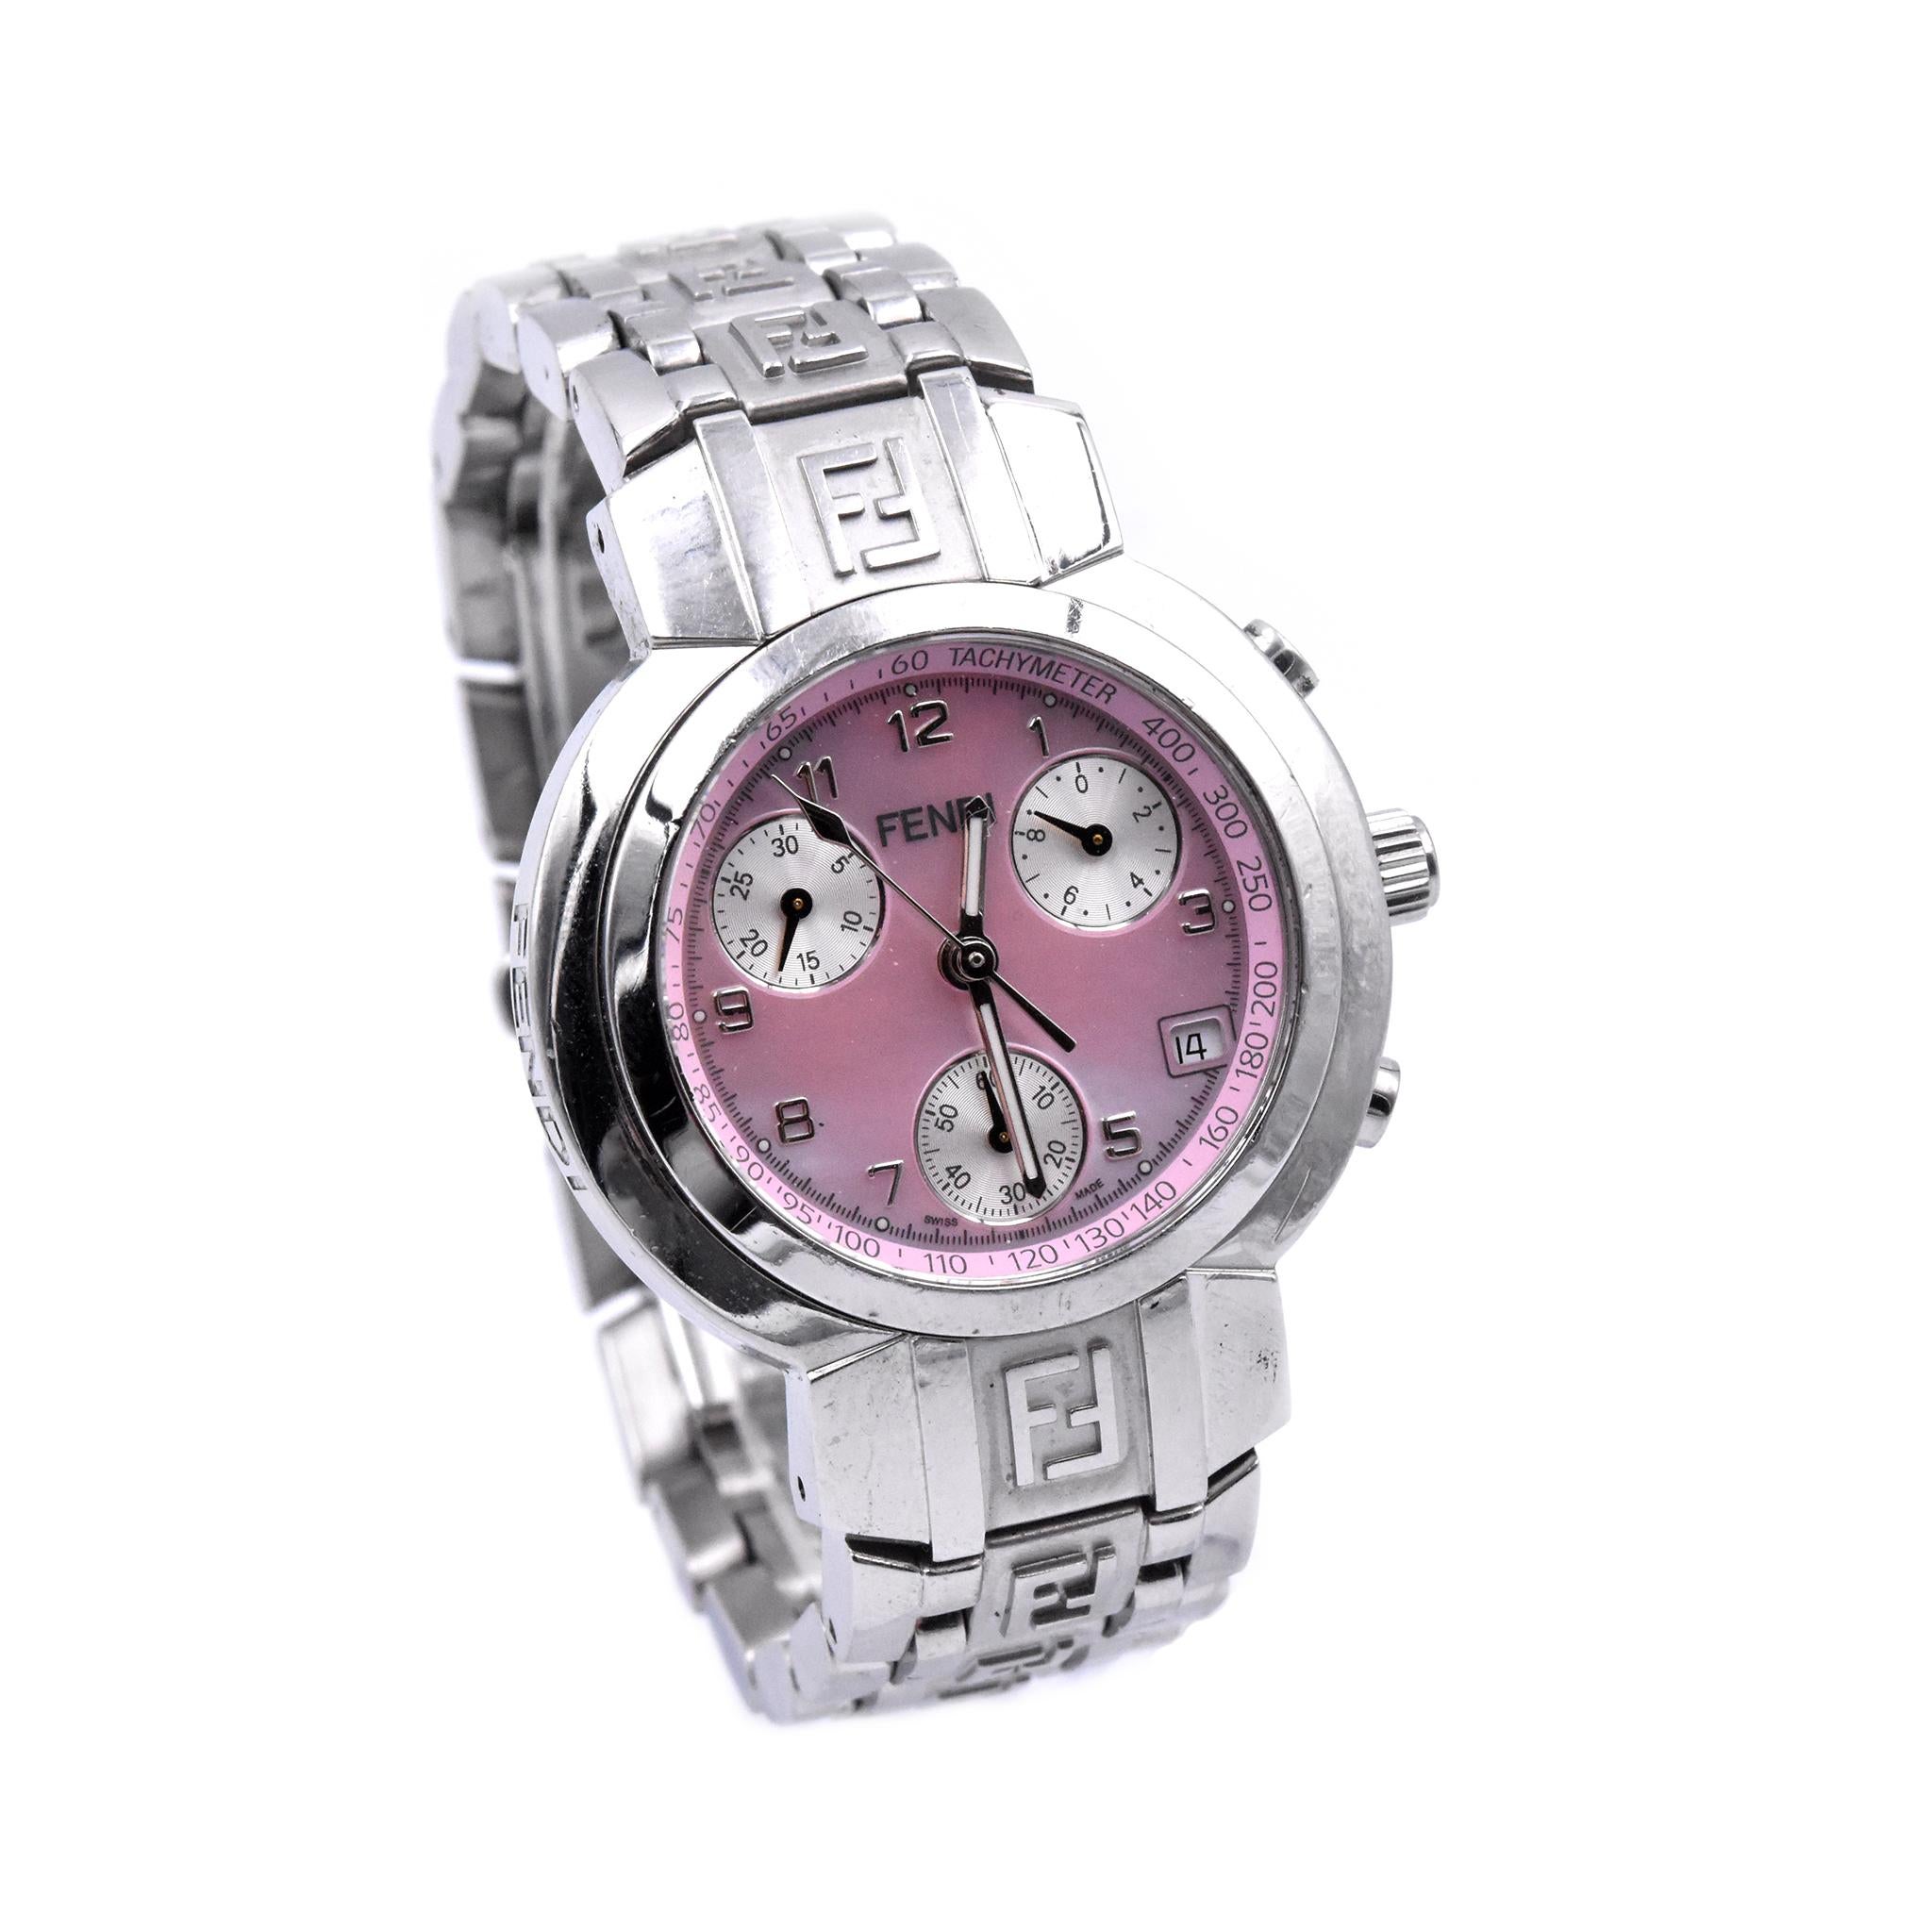 Movement: quartz
Function: hours, minutes, seconds
Case: 32mm round case, push/pull crown, sapphire crystal
Band: stainless steel bracelet, butterfly clasp
Dial: pink mother-of-pearl dial, white sub dials
Serial #: 059-45-XXX

Comes with original